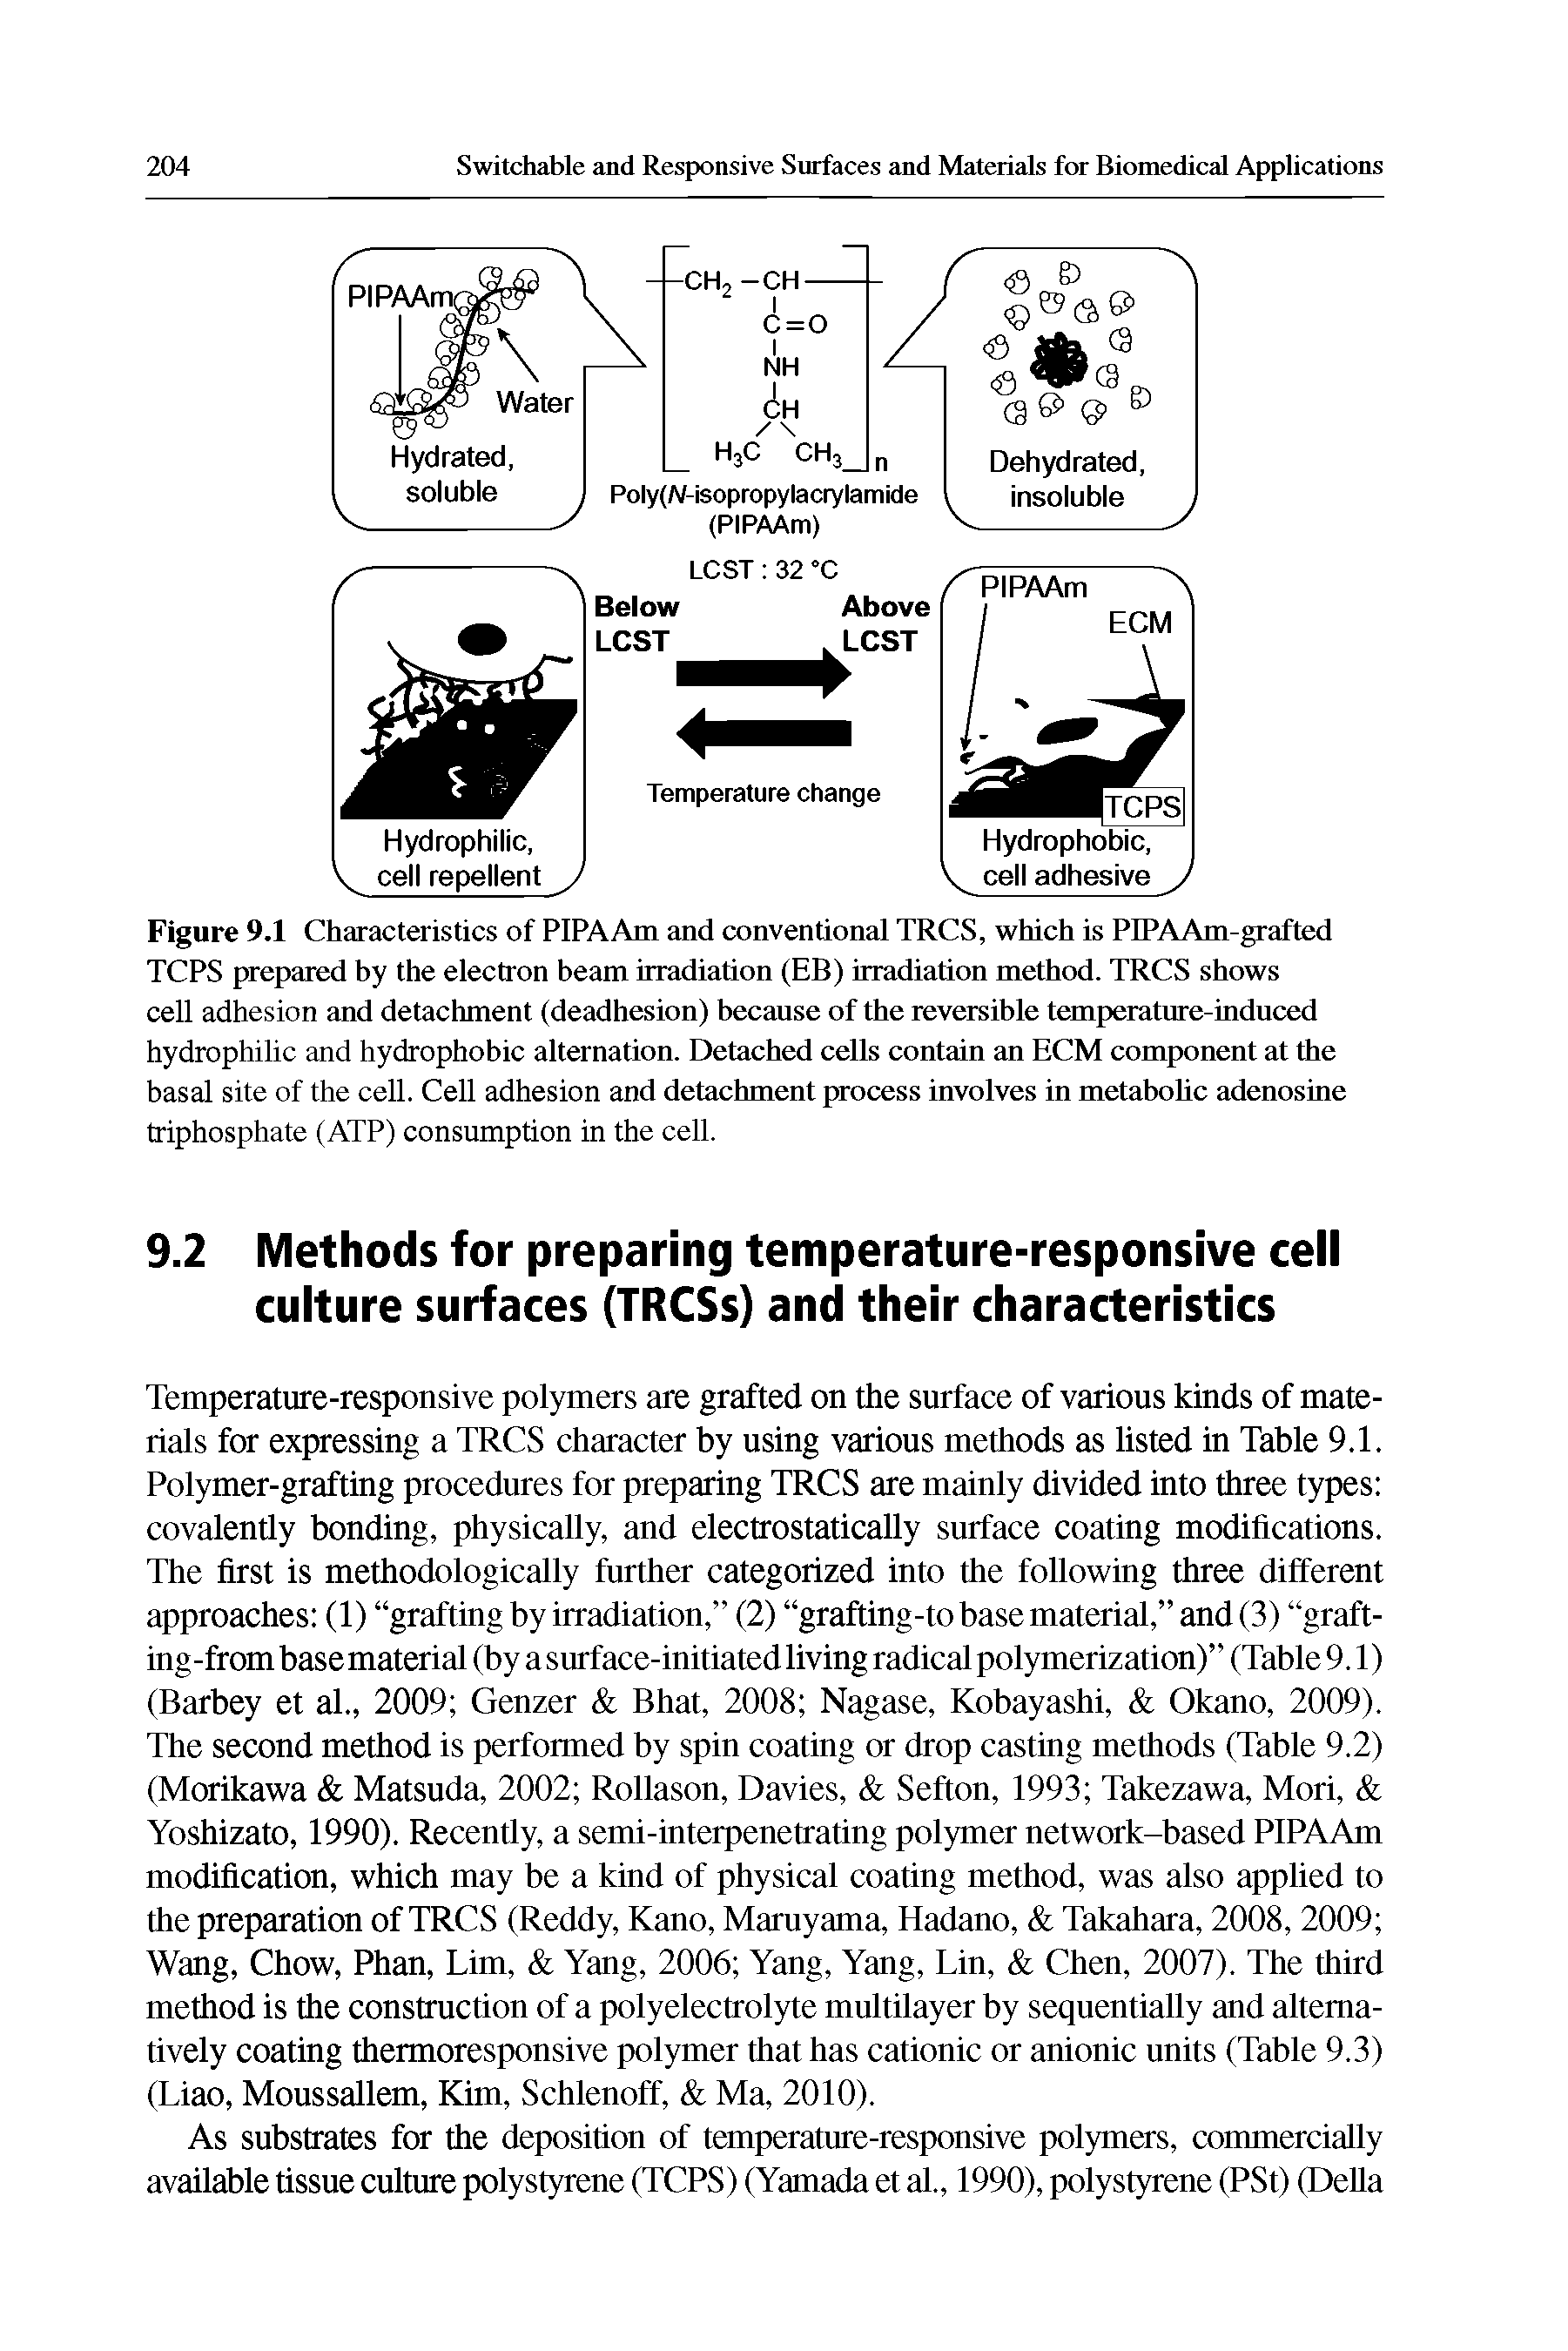 Figure 9.1 Characteristics of PIPAAm and conventional TRCS, which is PIPAAm-grafted TCPS prepared hy the electron beam irradiation (EB) irradiation method. TRCS shows cell adhesion and detachment (deadhesion) becanse of the reversible temperature-indnced hydrophilic and hydrophobic alternation. Detached cells contain an ECM component at the basal site of the cell. Cell adhesion and detachment process involves in metabohc adenosine triphosphate (ATP) consumption in the cell.